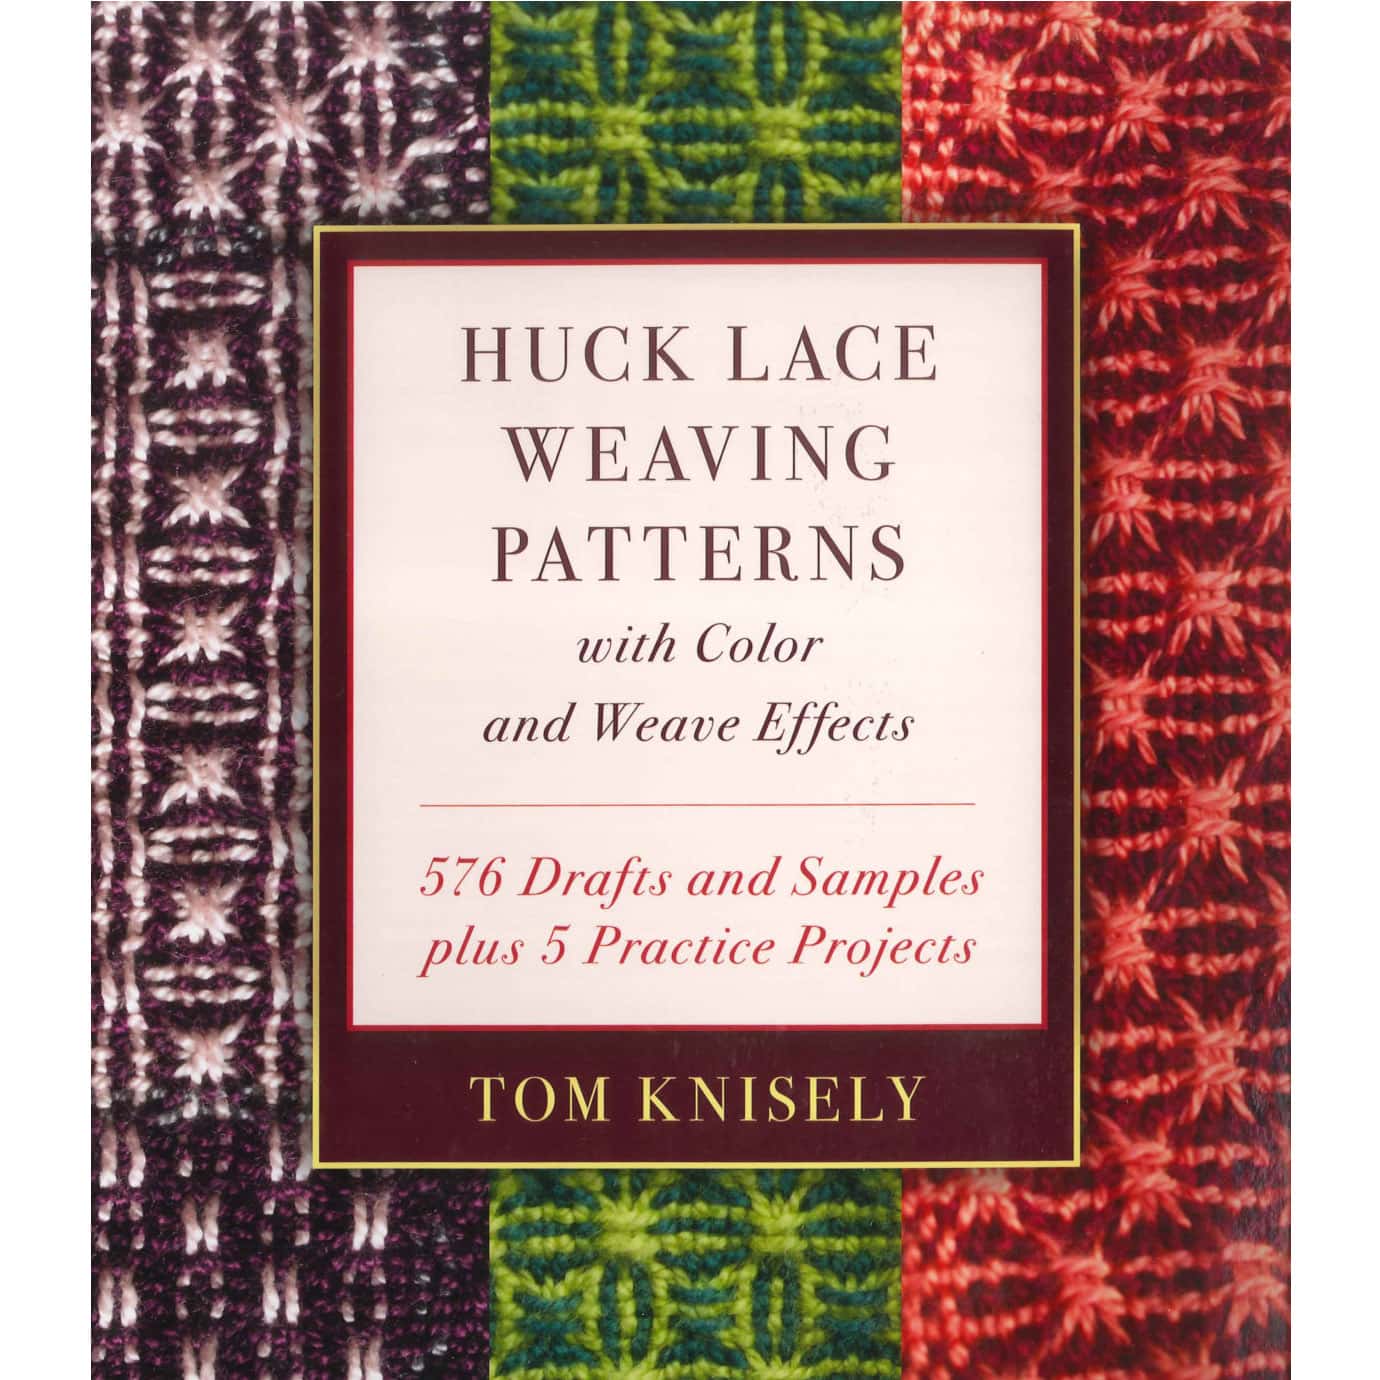 Huck Lace Weaving Patterns | Tom Knisely